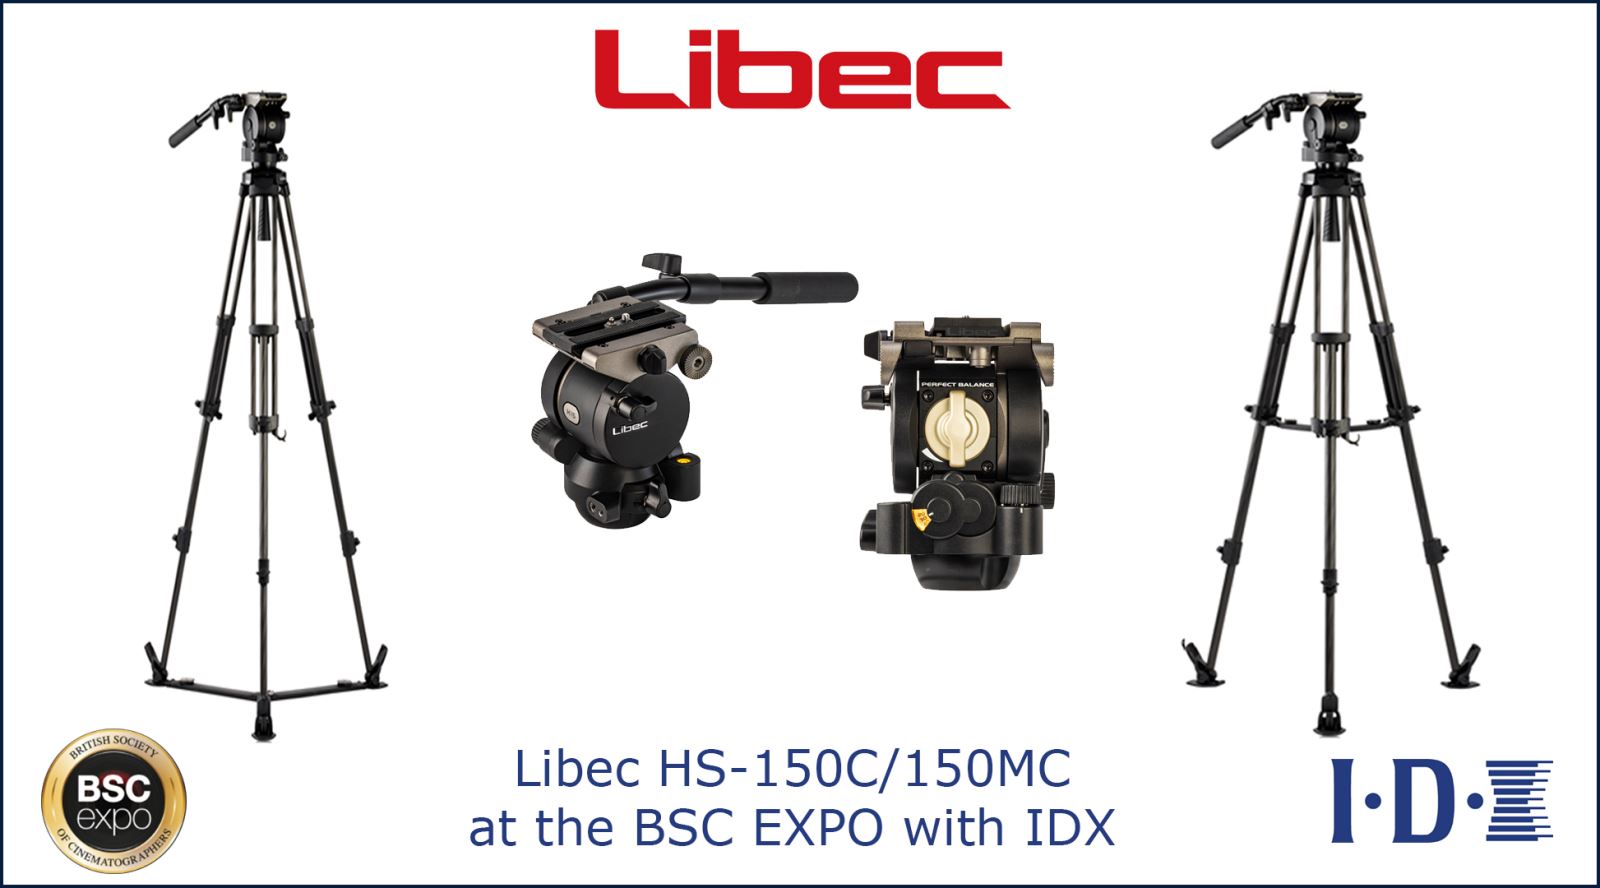 IDX at BSC Show demonstrates the New Libec HS-150C